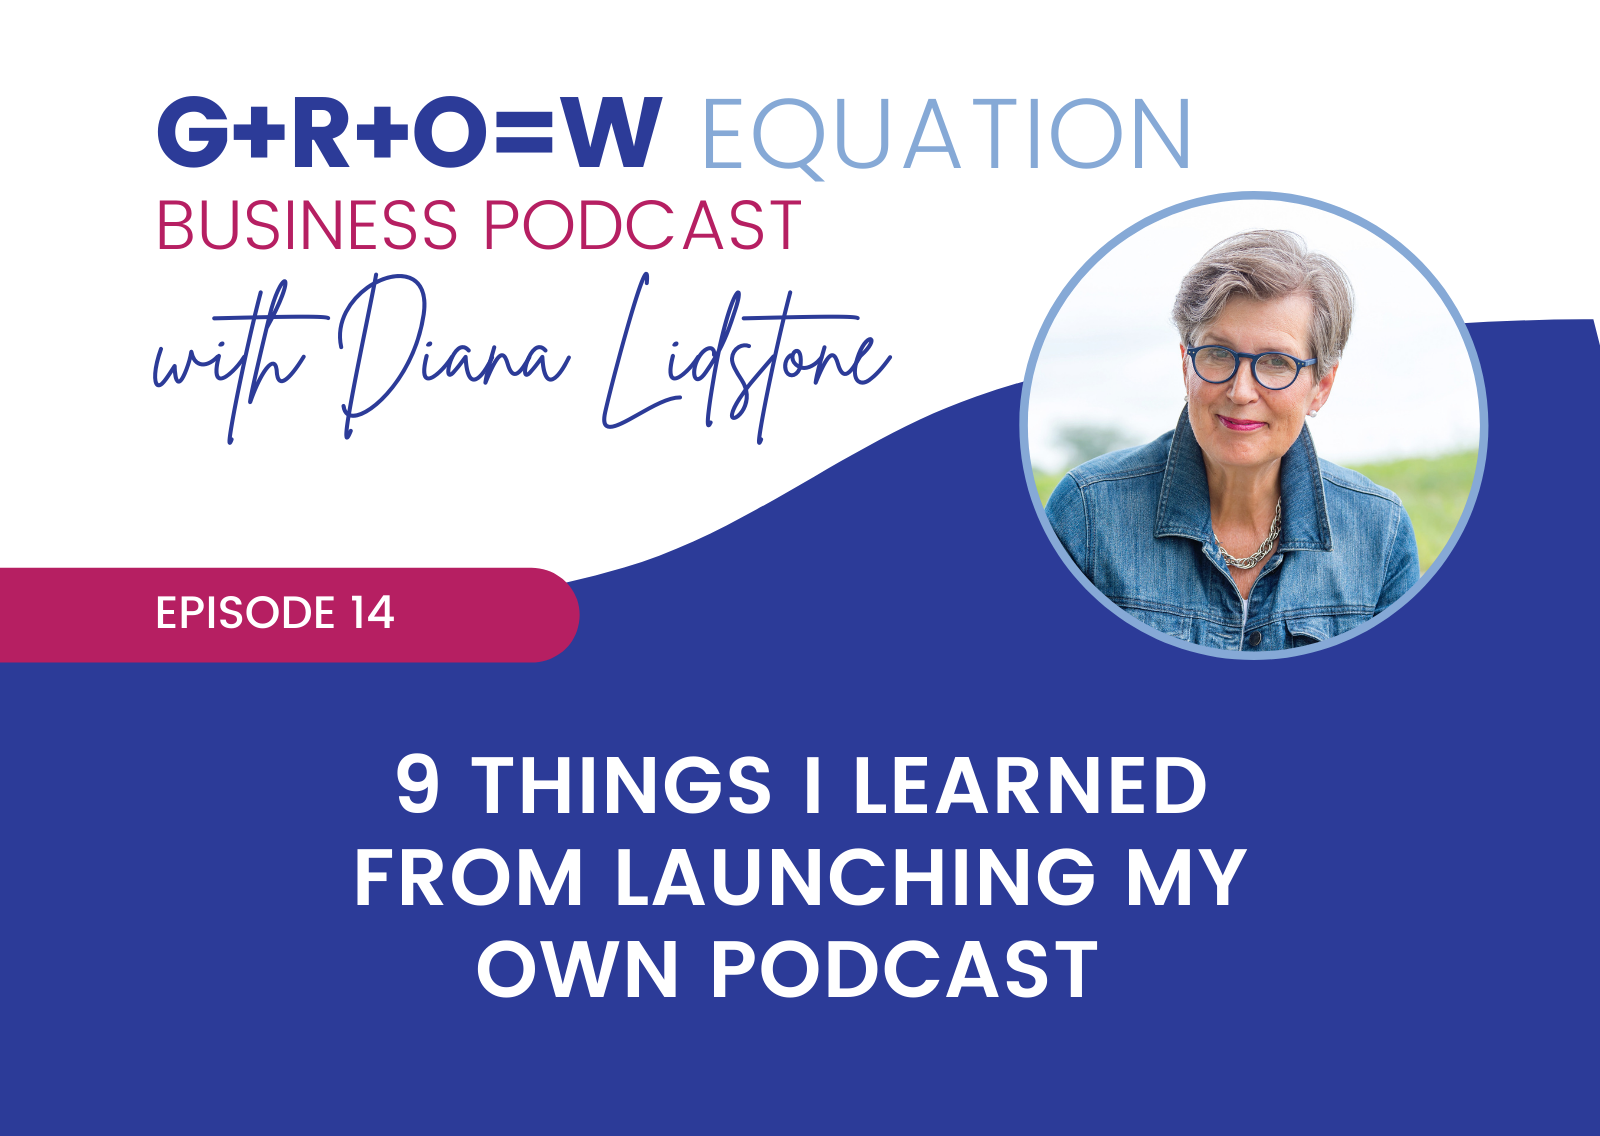 Episode 14 The GROW Equation Podcast